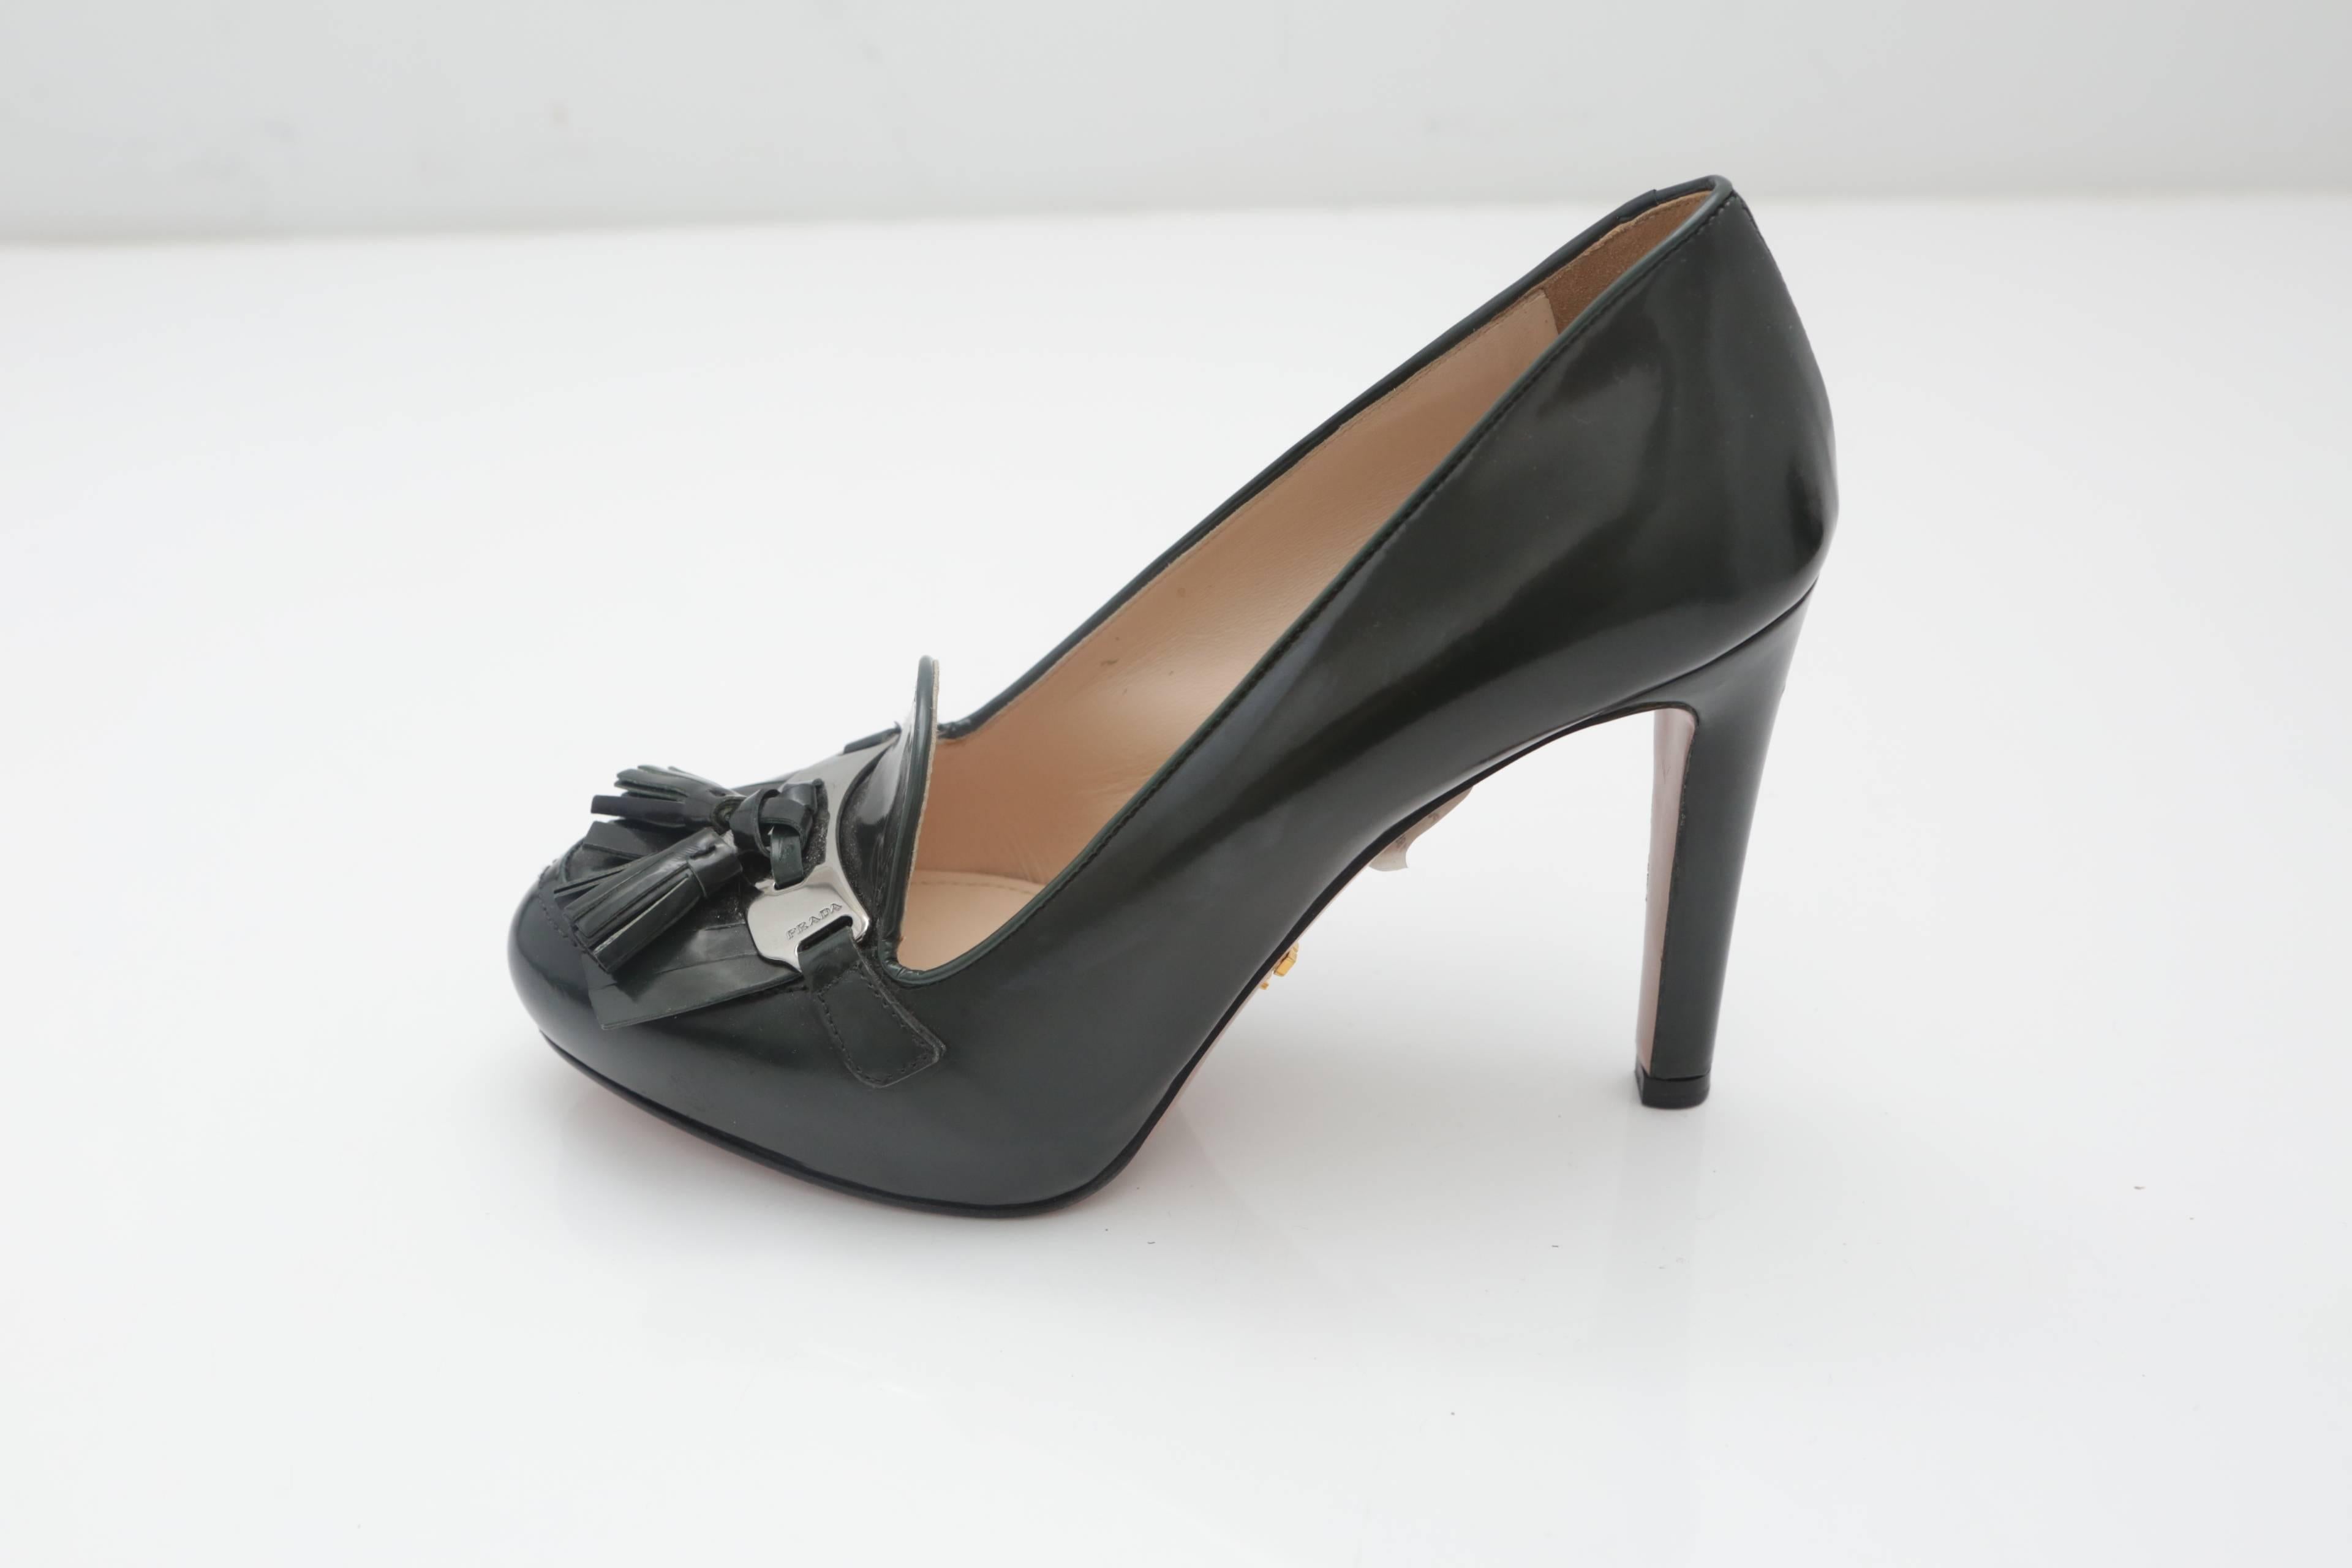 Prada patent leather green pumps with 4" heel, tassels, front logo and silver placket. Gold "Prada" placket on bottom.